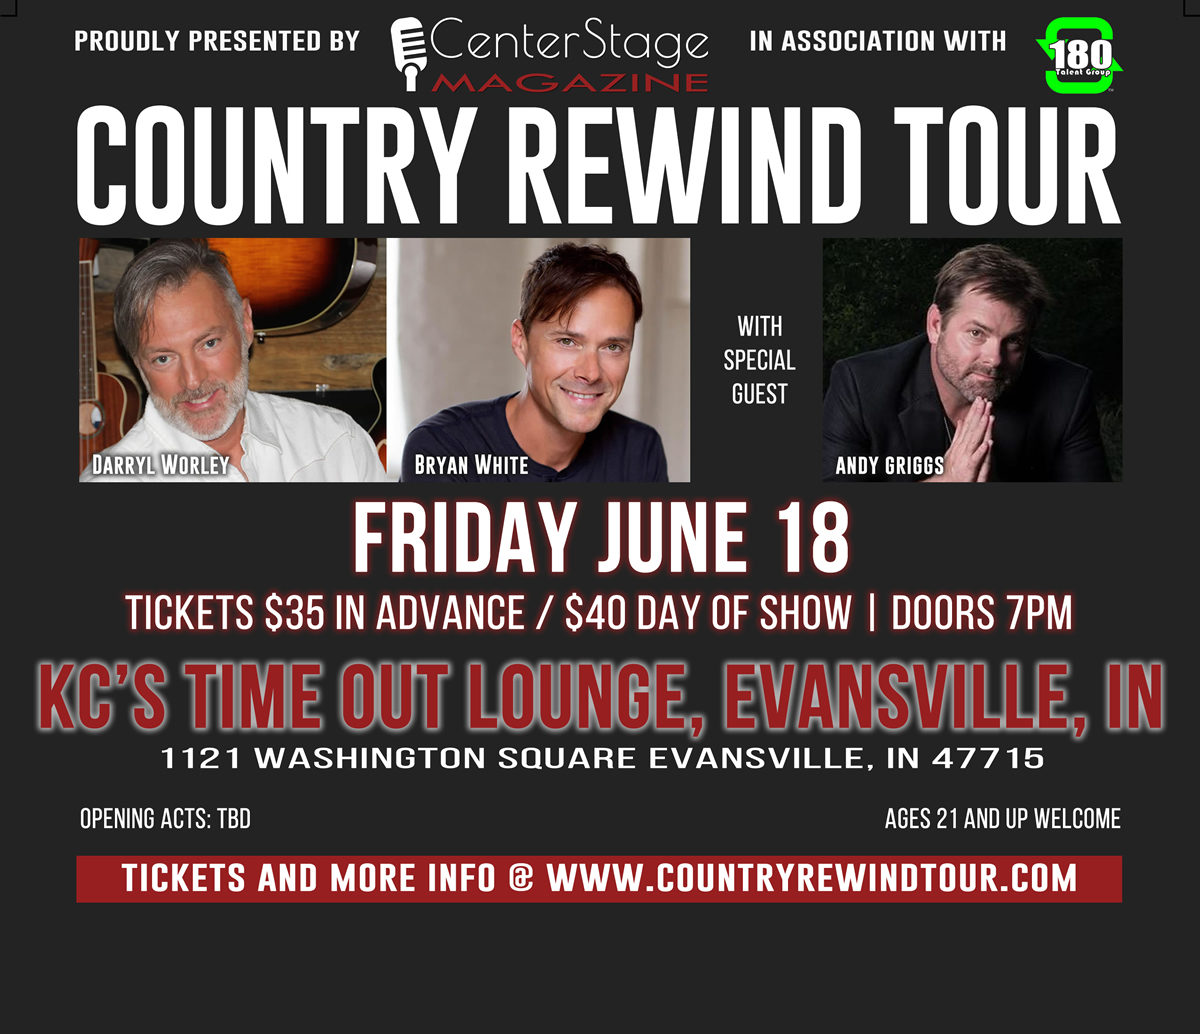 Country Rewind Tour featuring Bryan White, Darryl Worley, Andy Griggs presented by Center Stage Magazine in association with 180 Talent Group